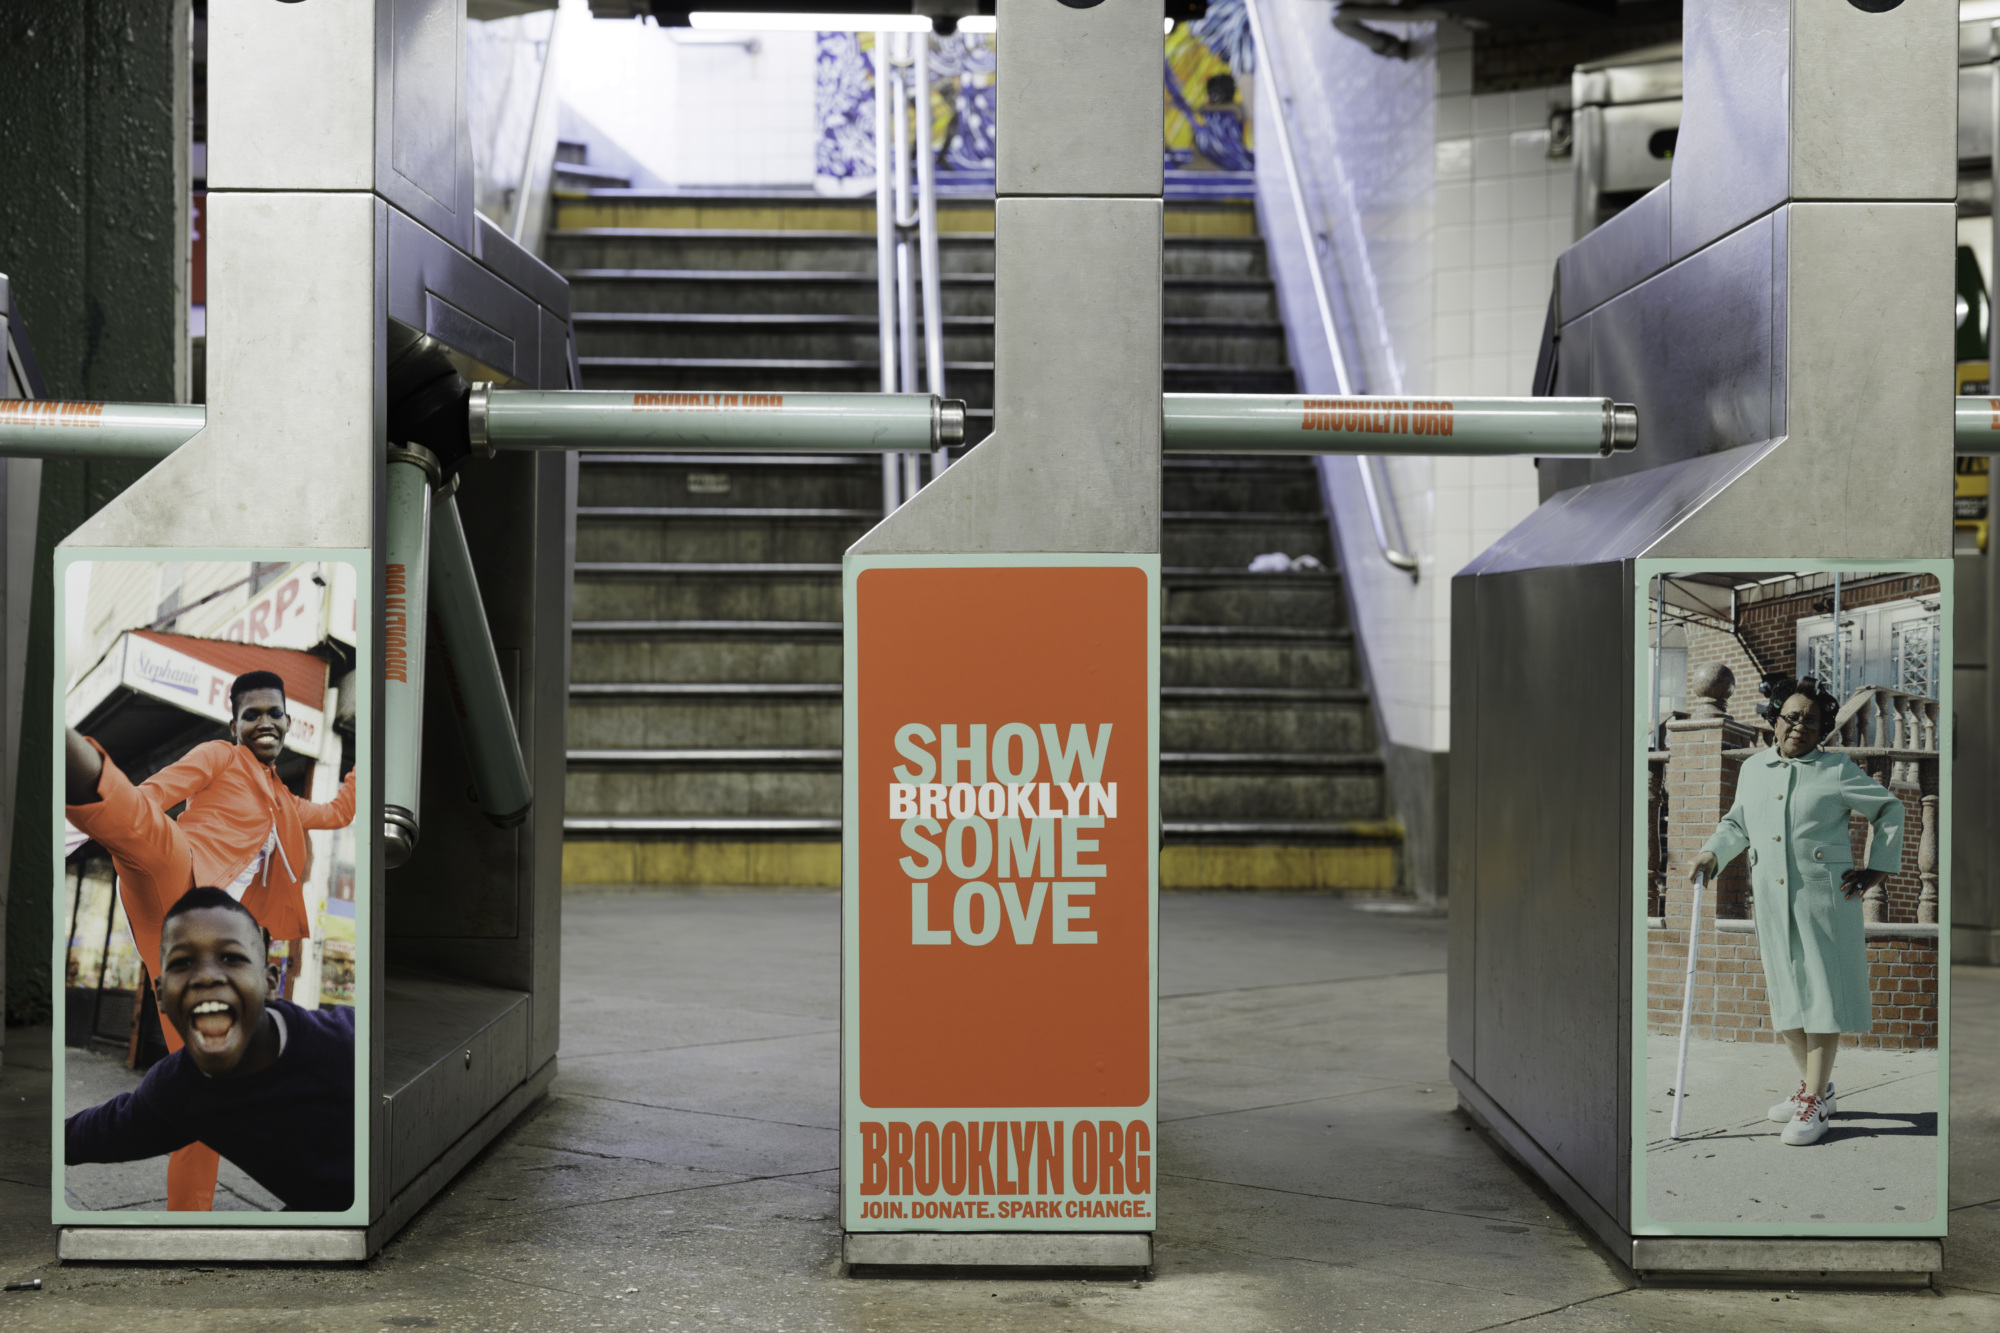 Subway turnstiles with signs that read "Give to Brooklyn." Two posters show smiling people. Stairs leading to an upper level are in the background.